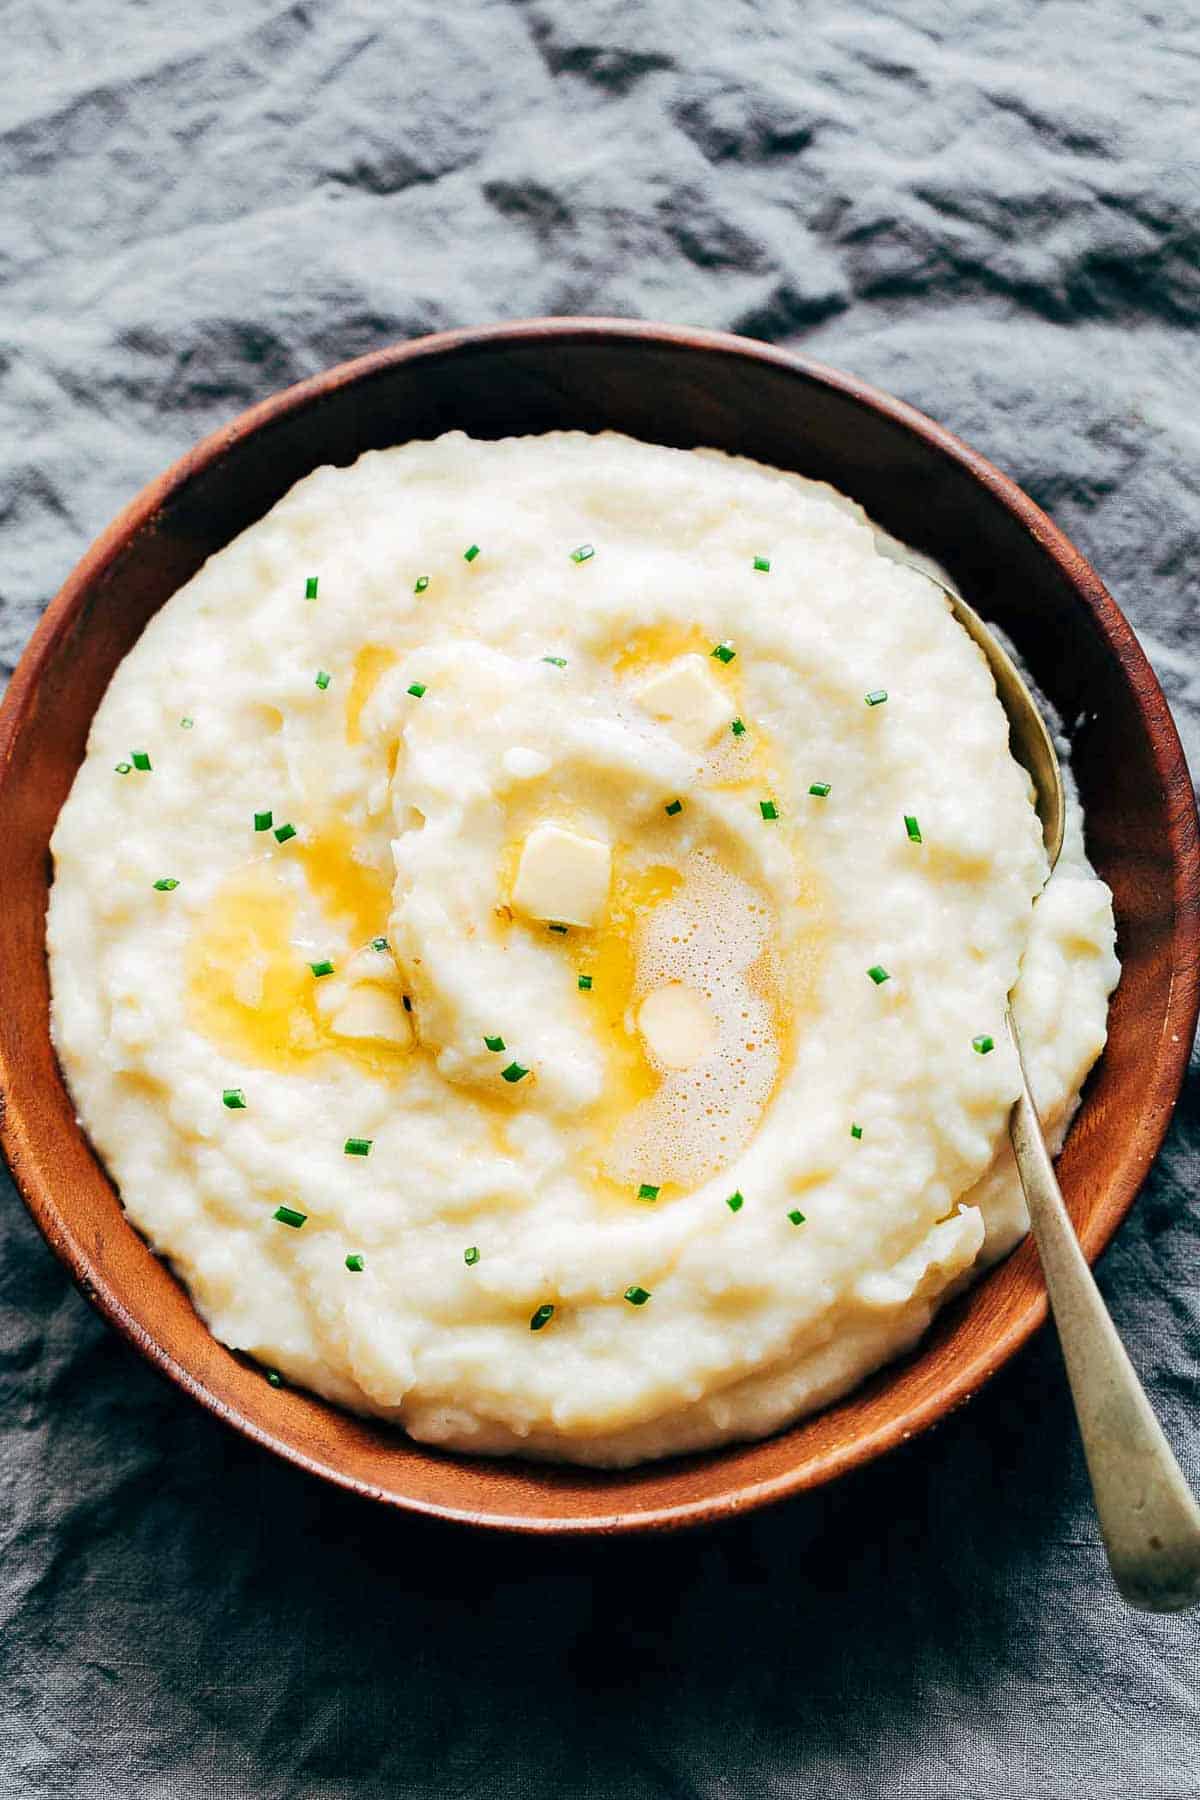 Mashed potatoes flavored with garlic and served in a wooden bowl.